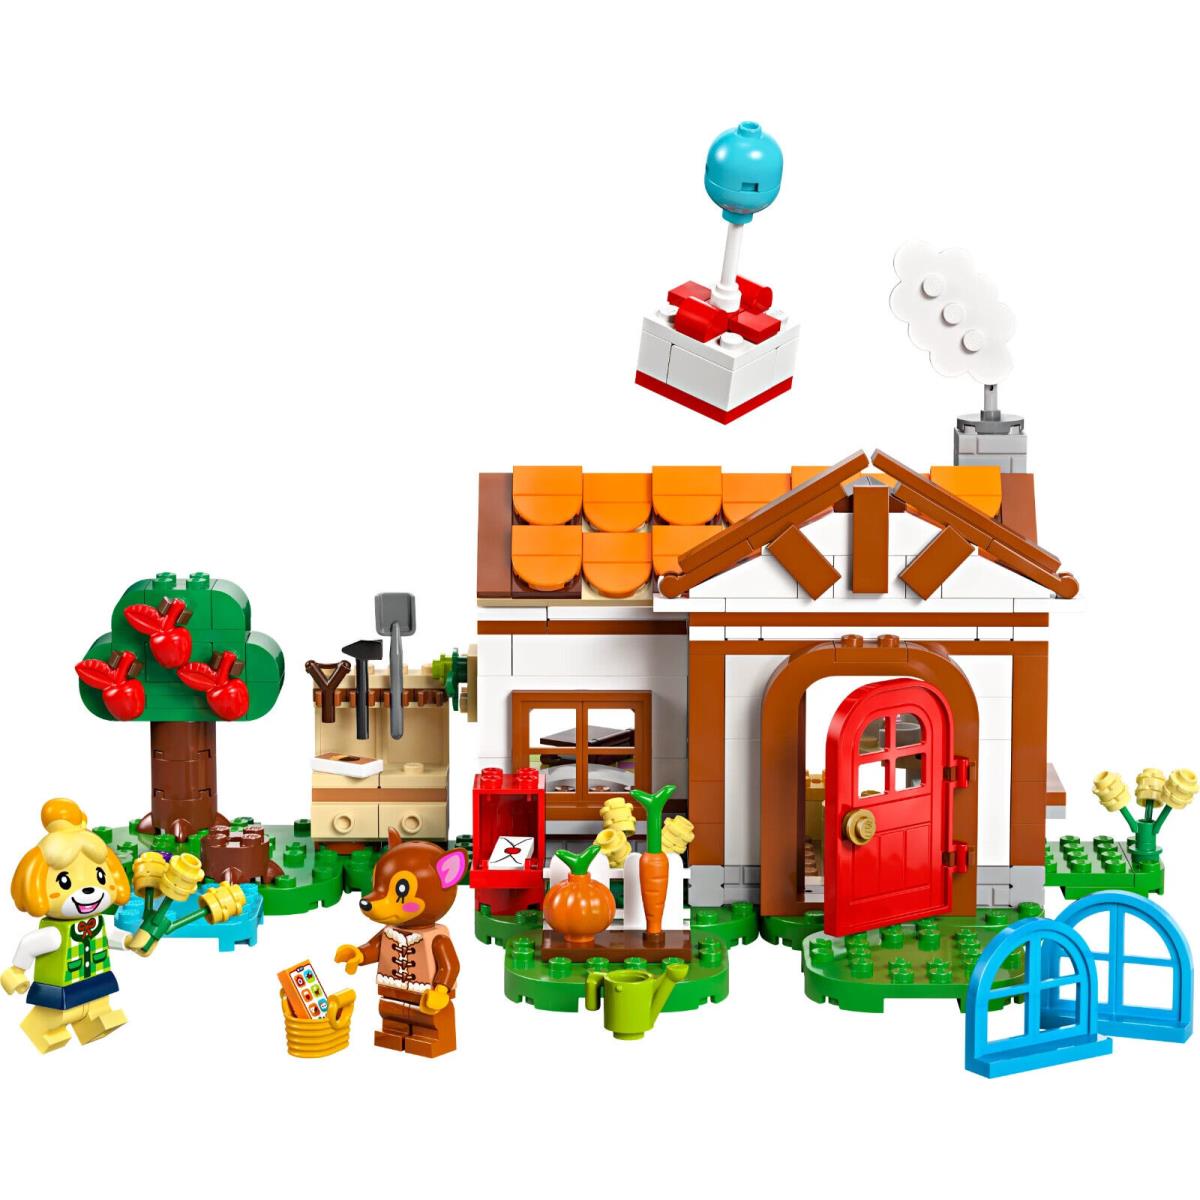 Lego 77049 Animal Crossing Isabelle s House Visit 389 Pieces